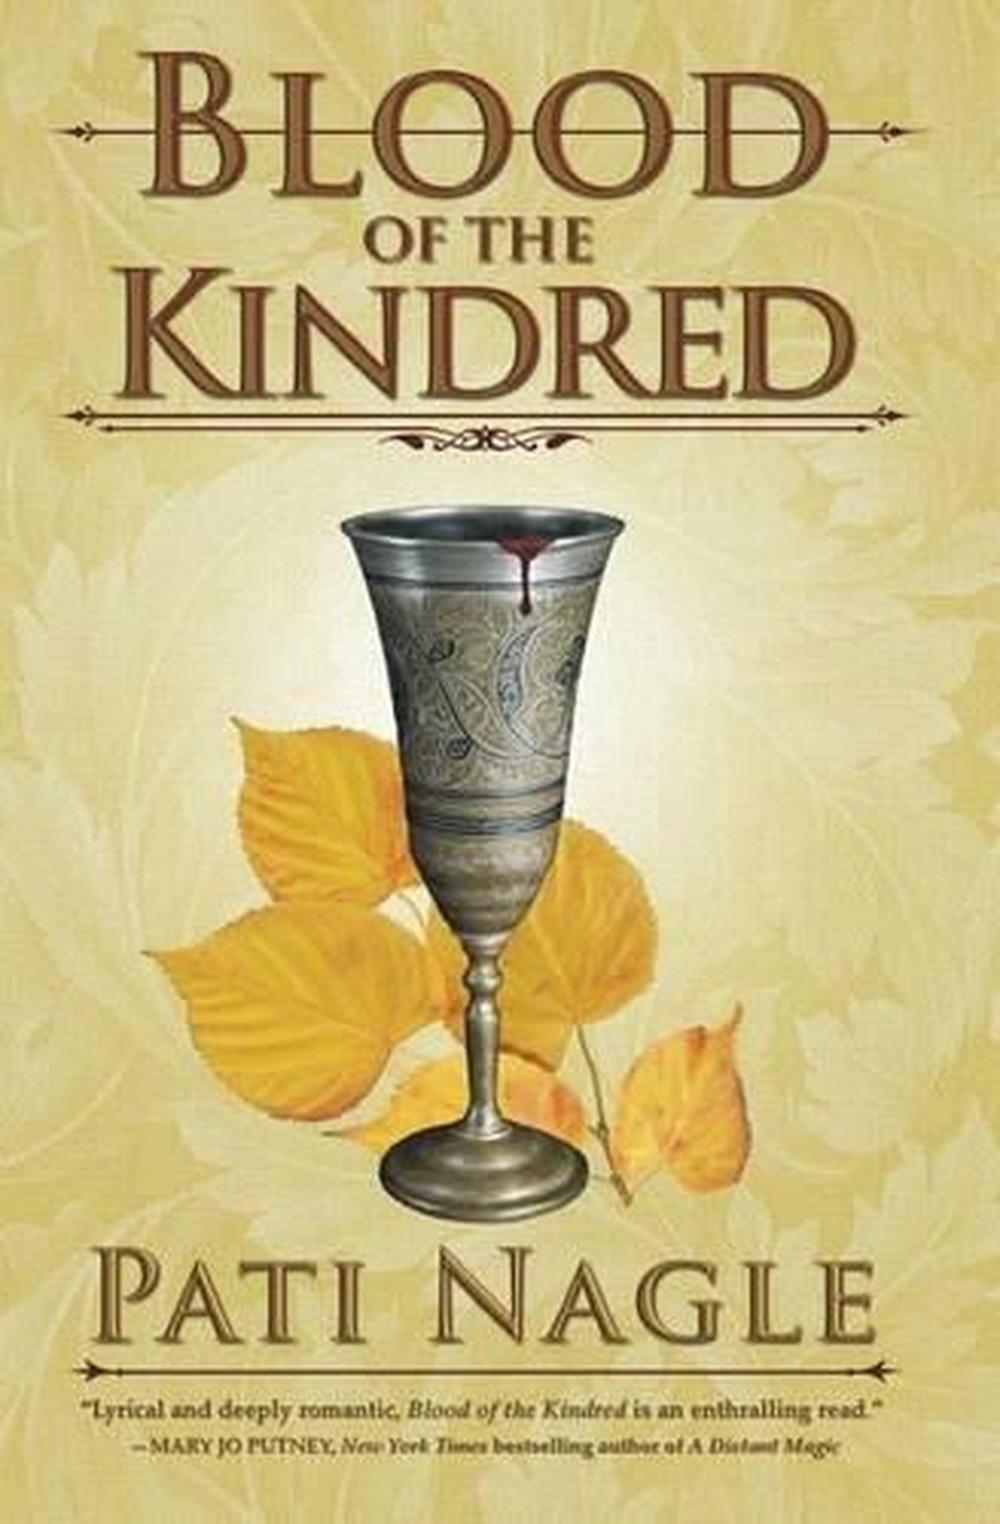 the kindred book alechia dow